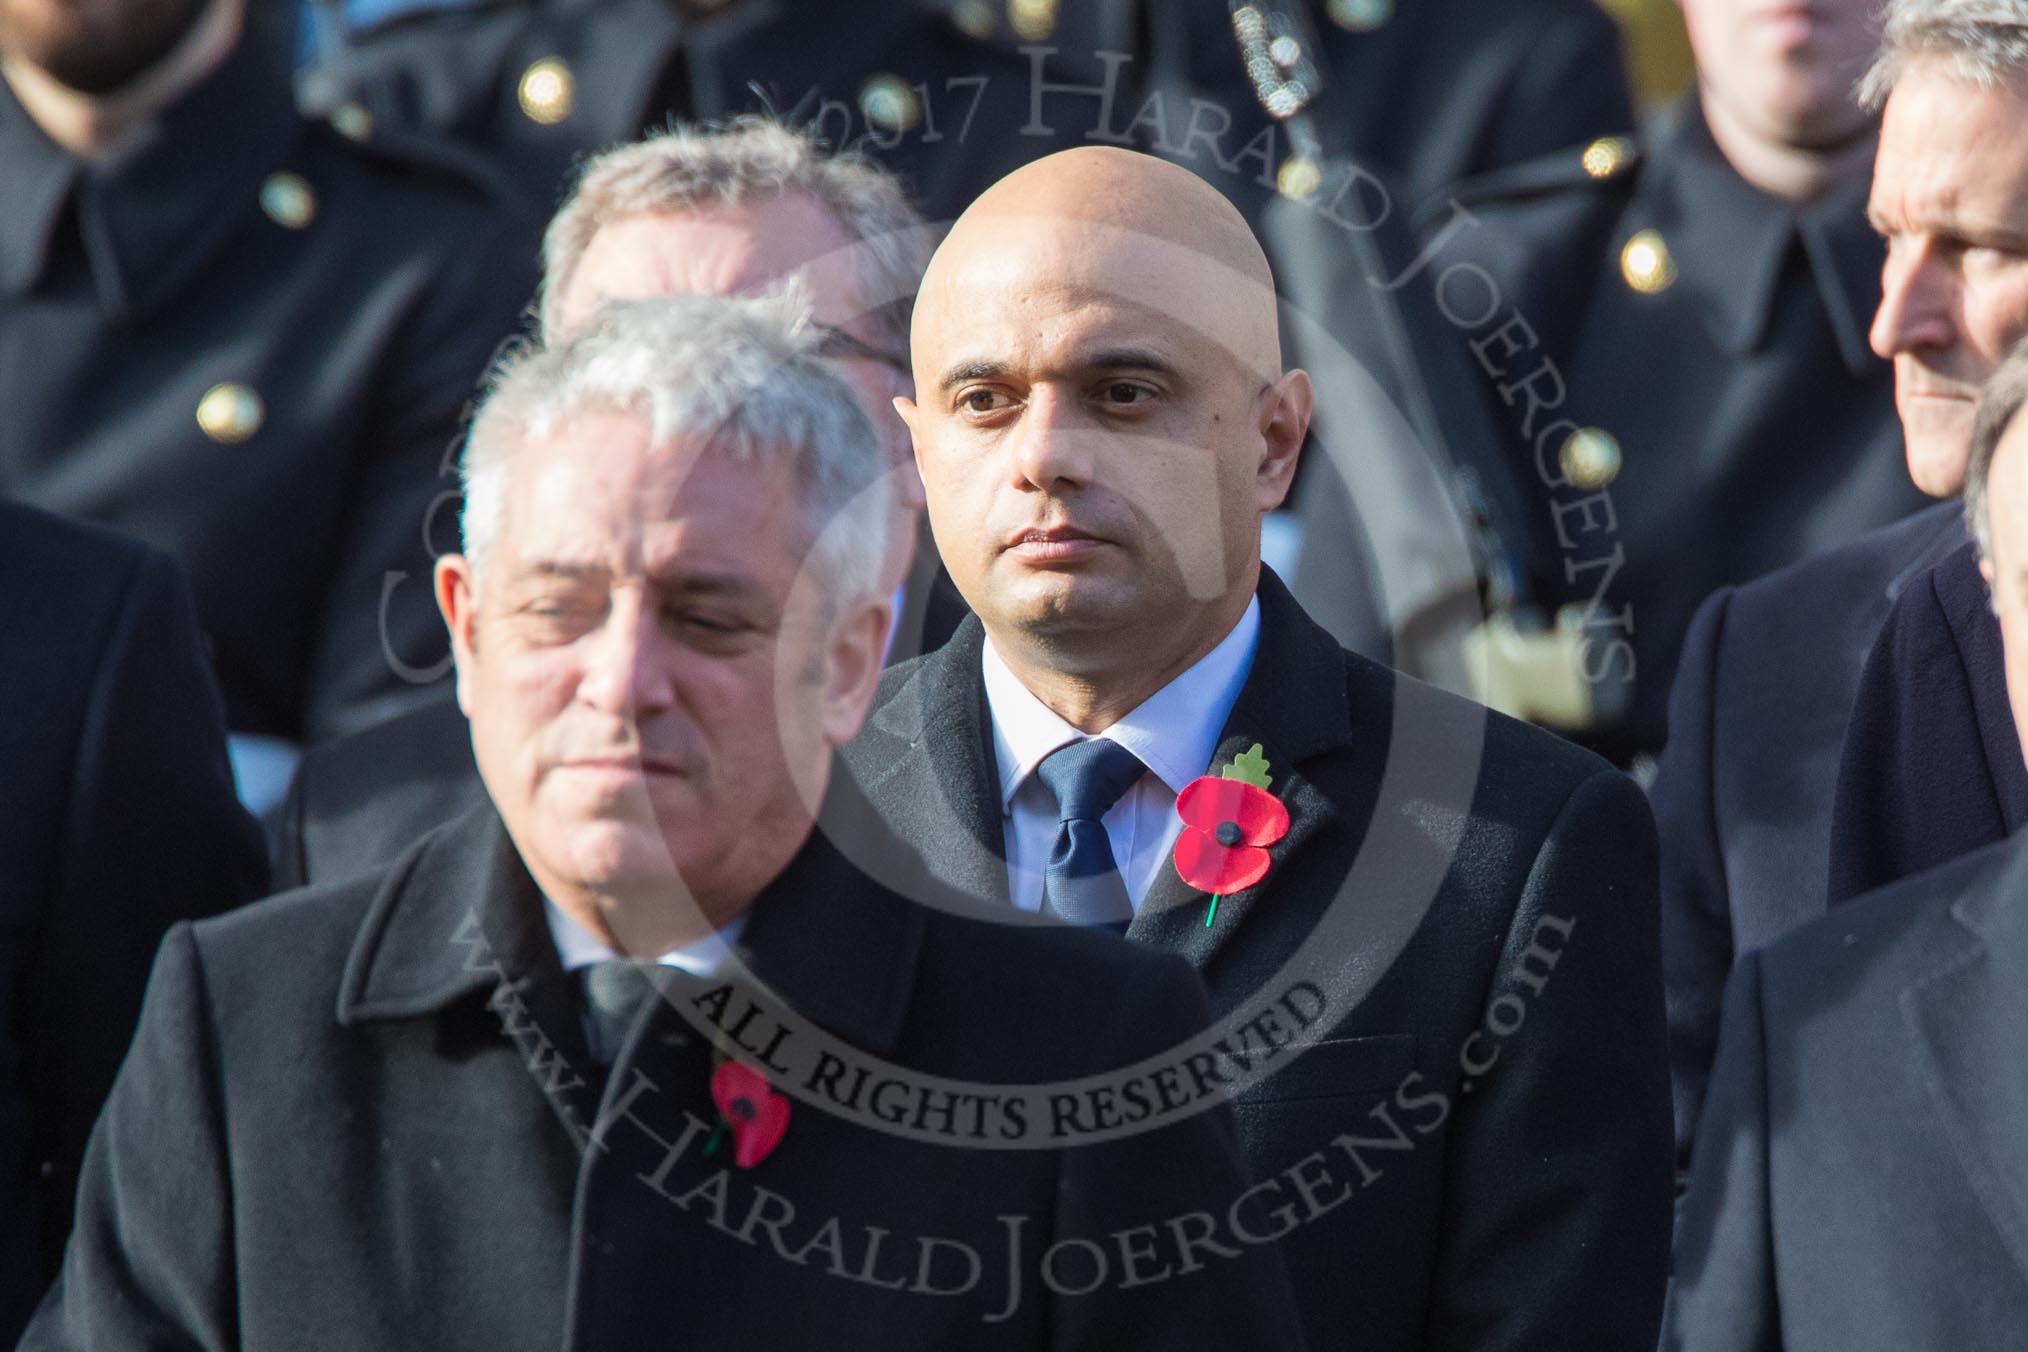 The Rt Hon Sajid Javid MP (Secretary of State for the Home Department) with his wreath during the Remembrance Sunday Cenotaph Ceremony 2018 at Horse Guards Parade, Westminster, London, 11 November 2018, 10:57.